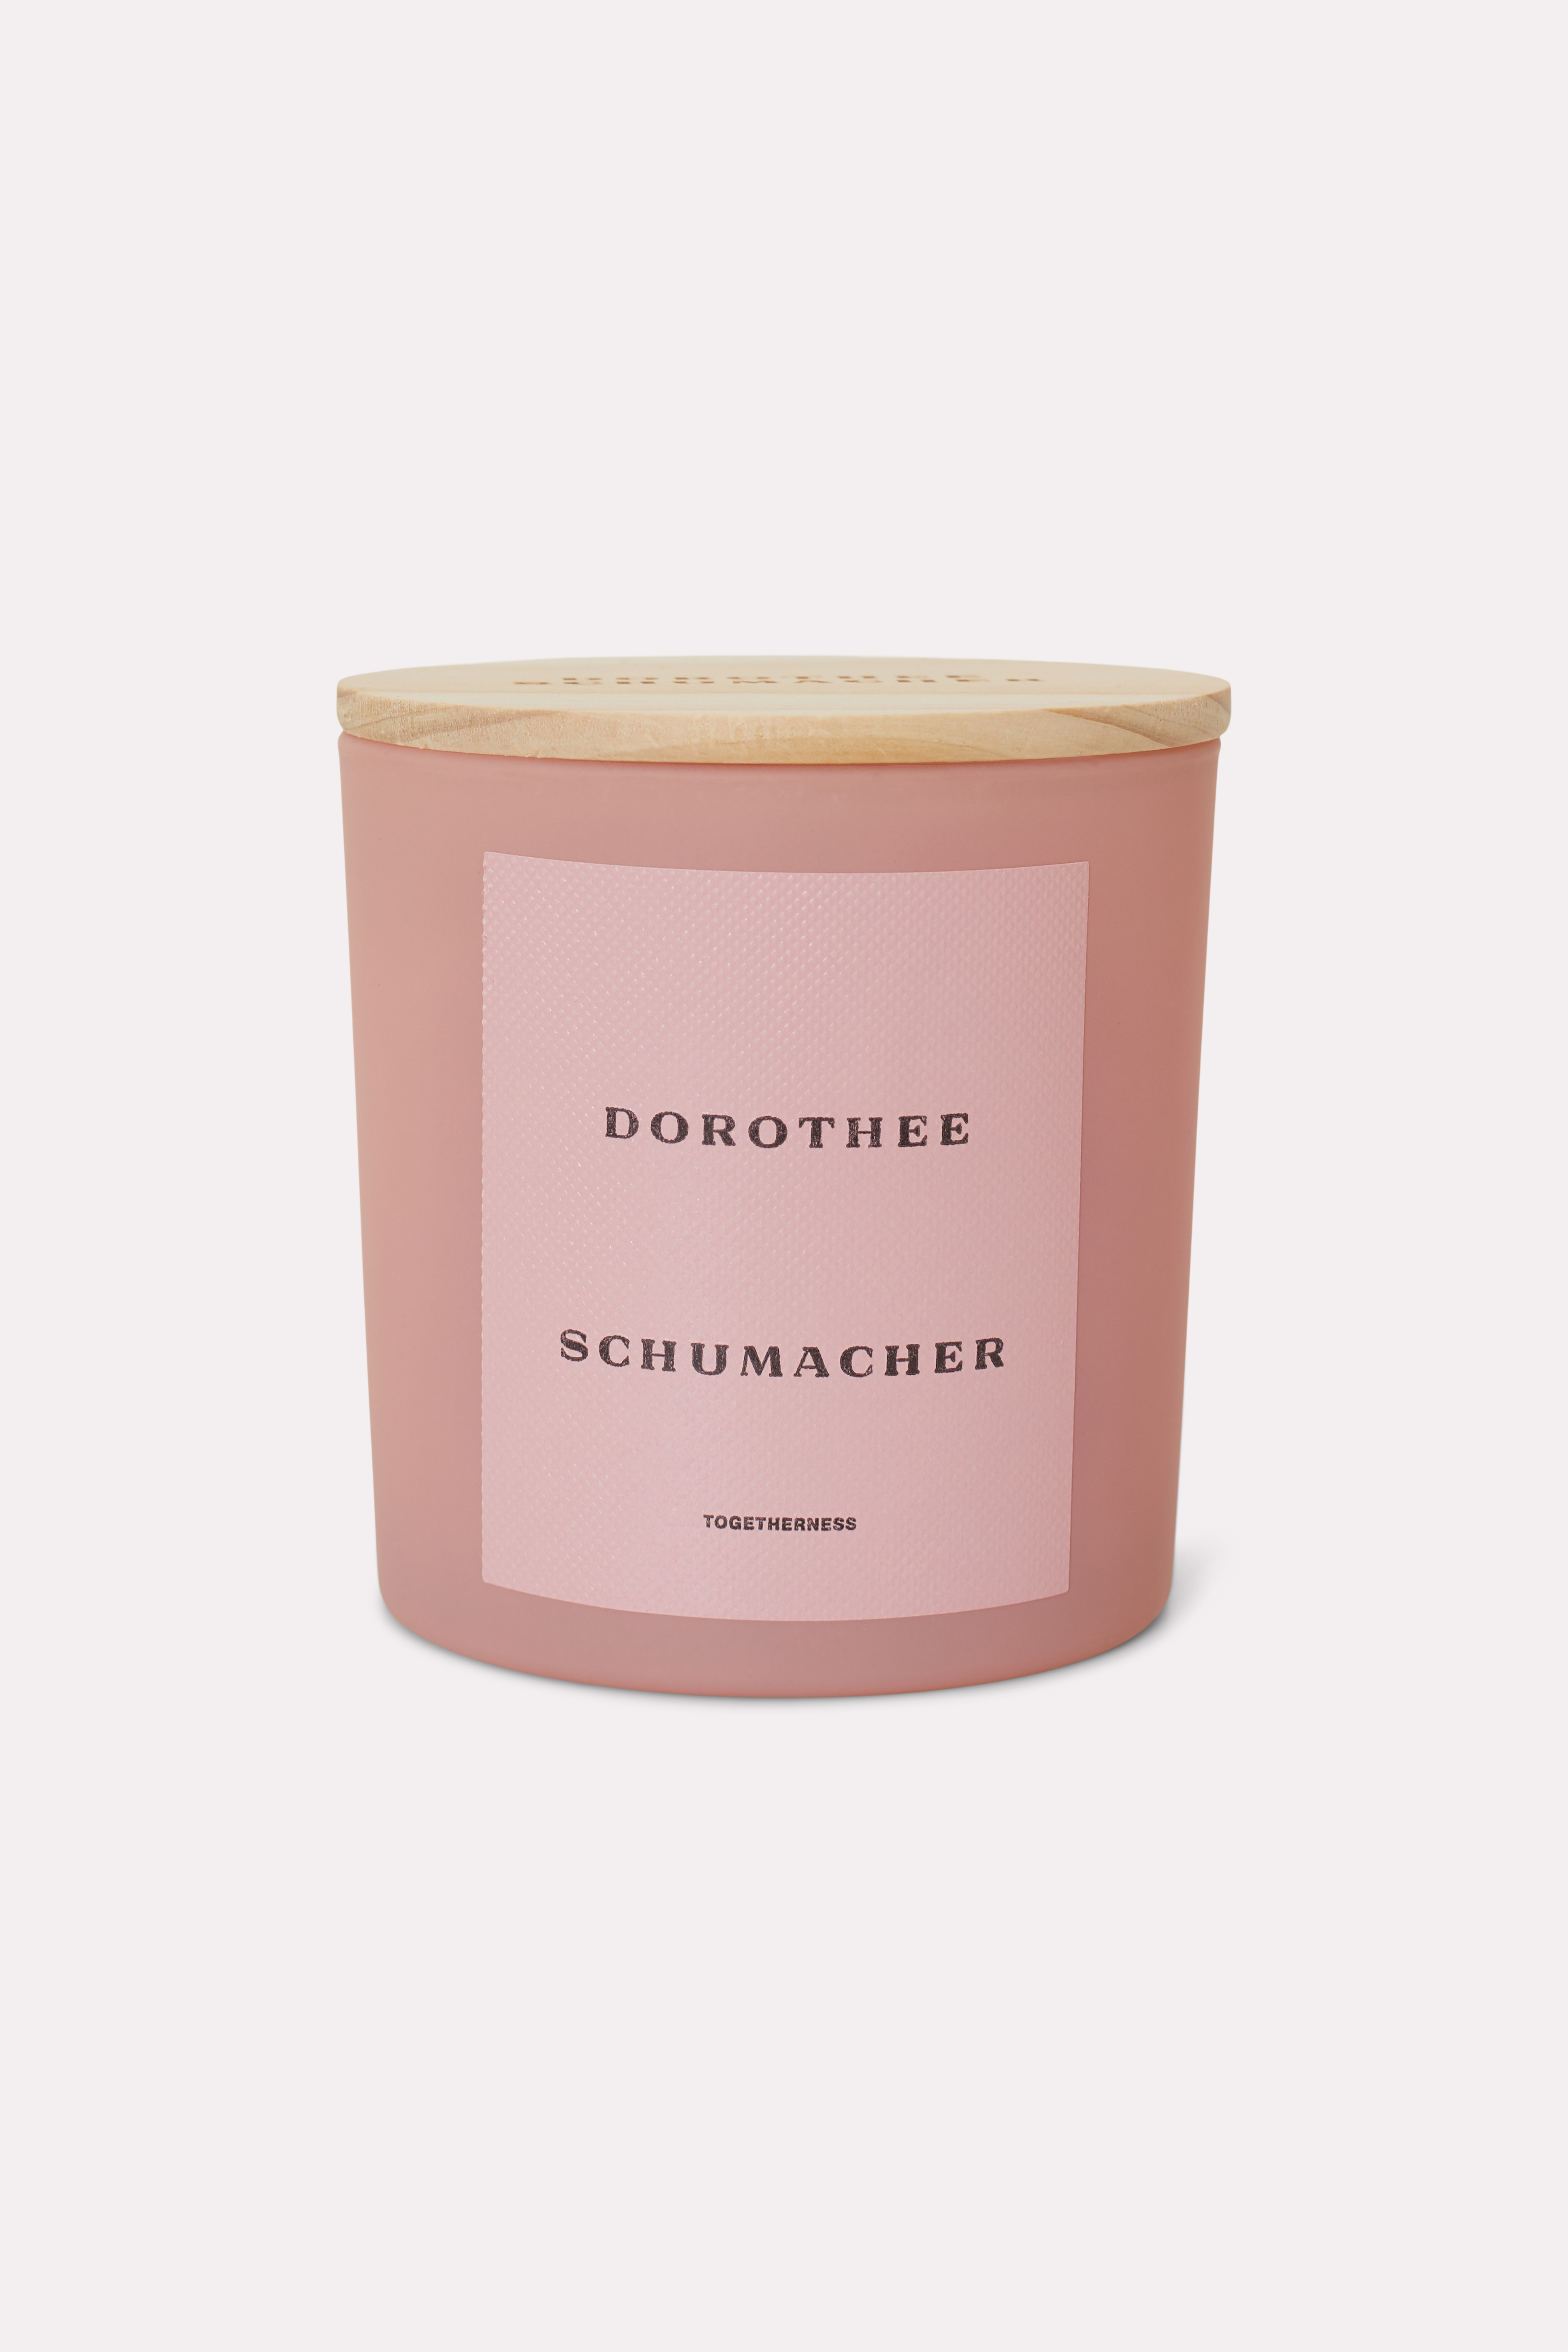 Dorothee Schumacher Large Scented Soy Wax Candle With Wooden Lid In Light Pink